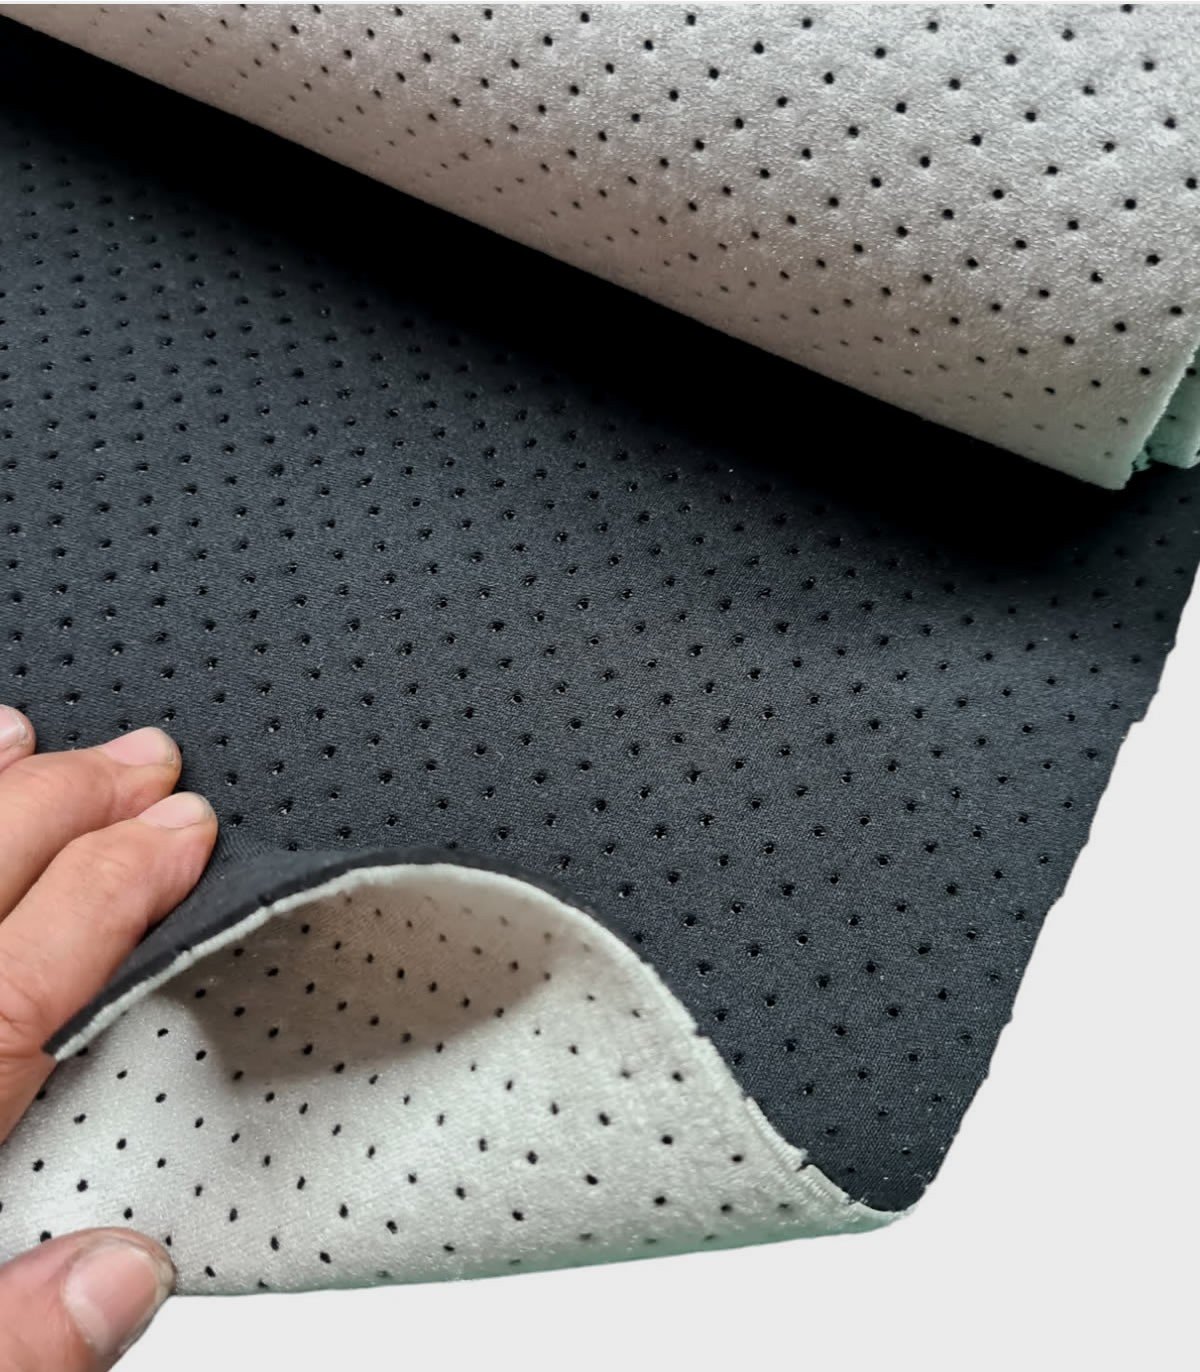 Velcro fabric perforated with 3mm neoprene